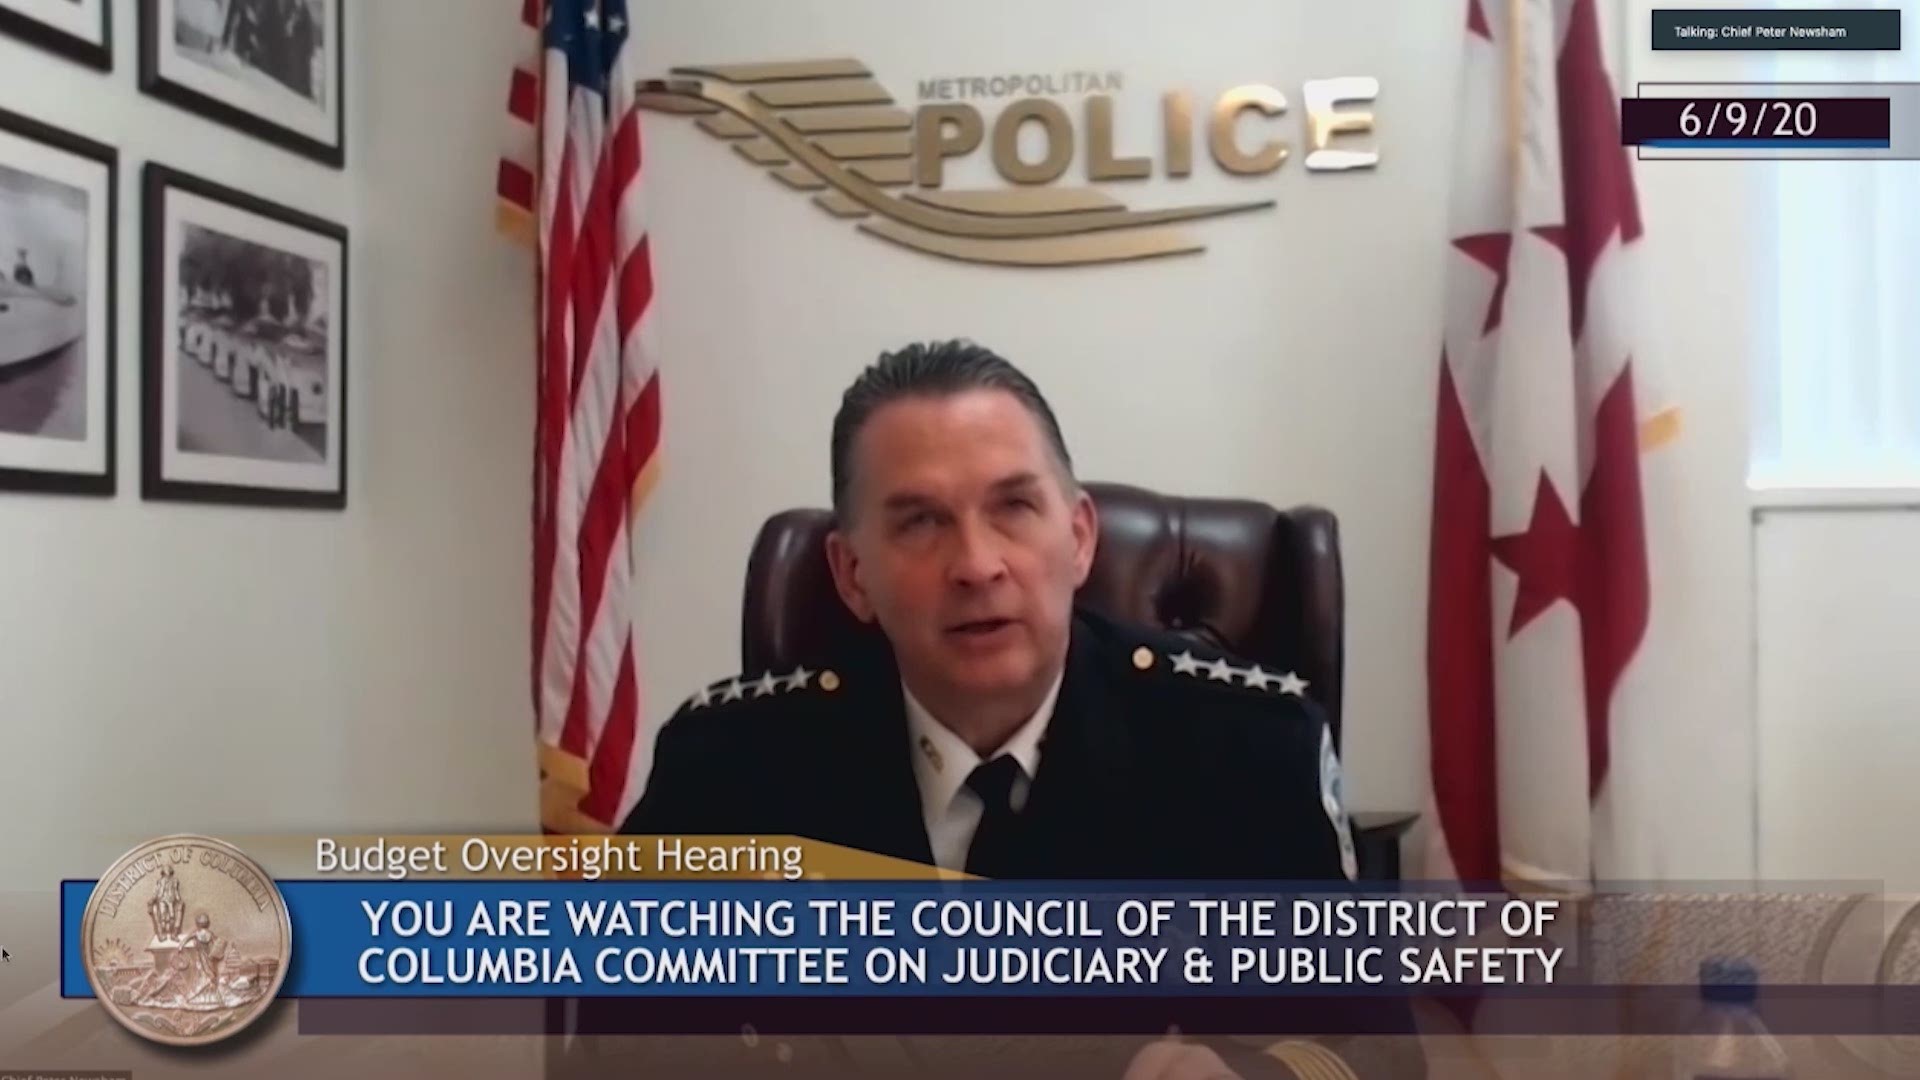 The Metropolitan Police Department and the DC Government have been promising review since September 2019.